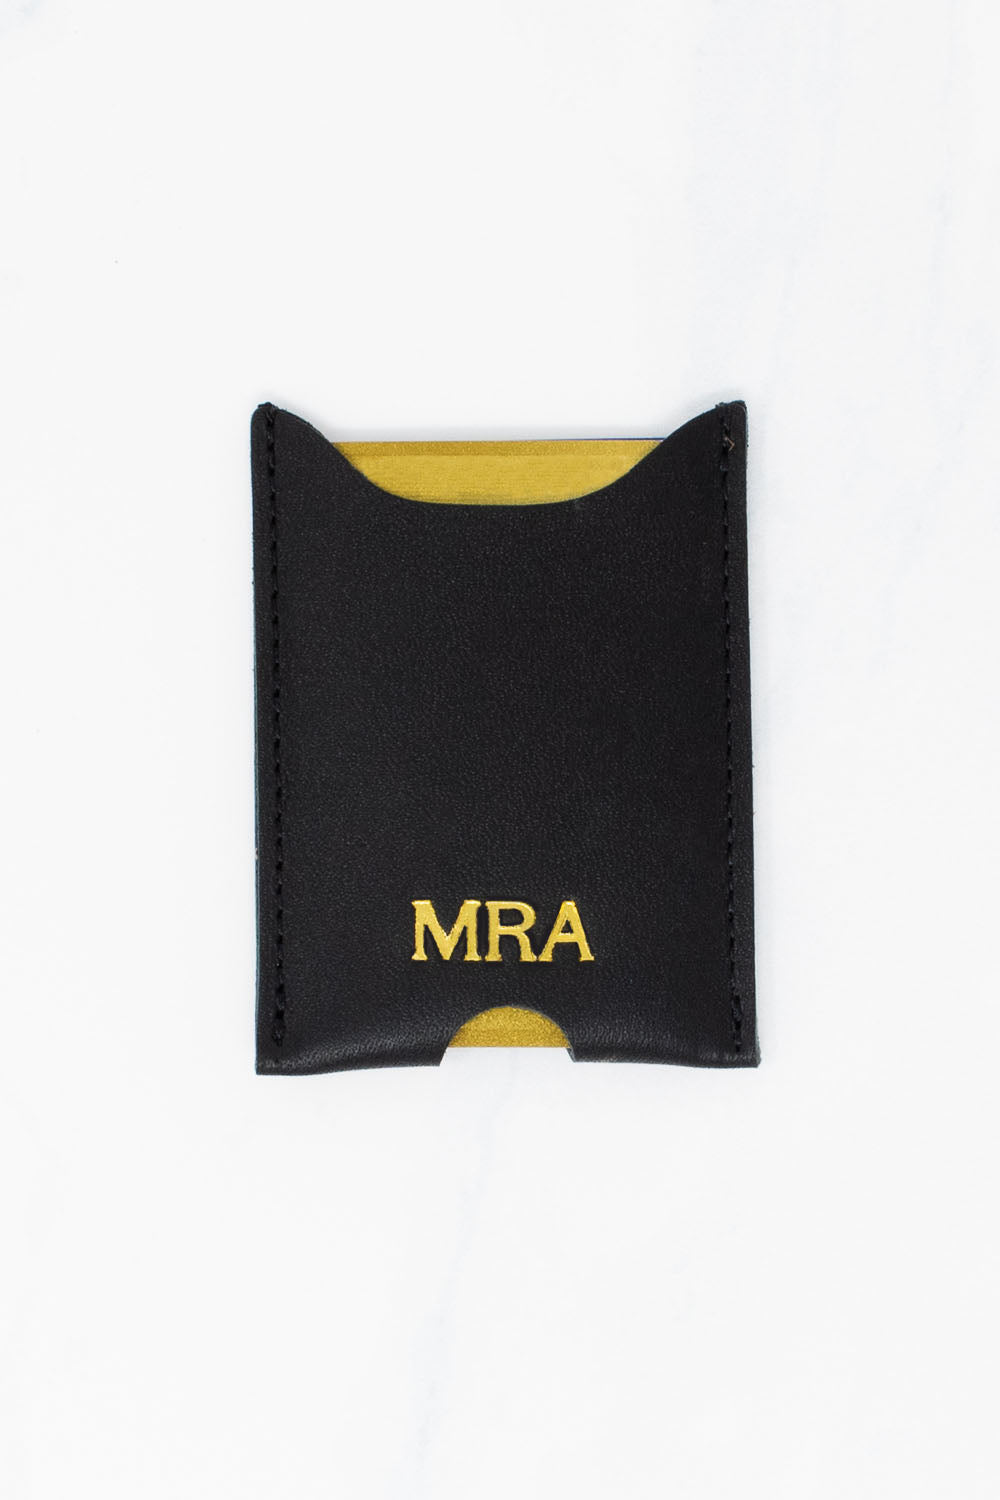 Personalized Card Sleeve